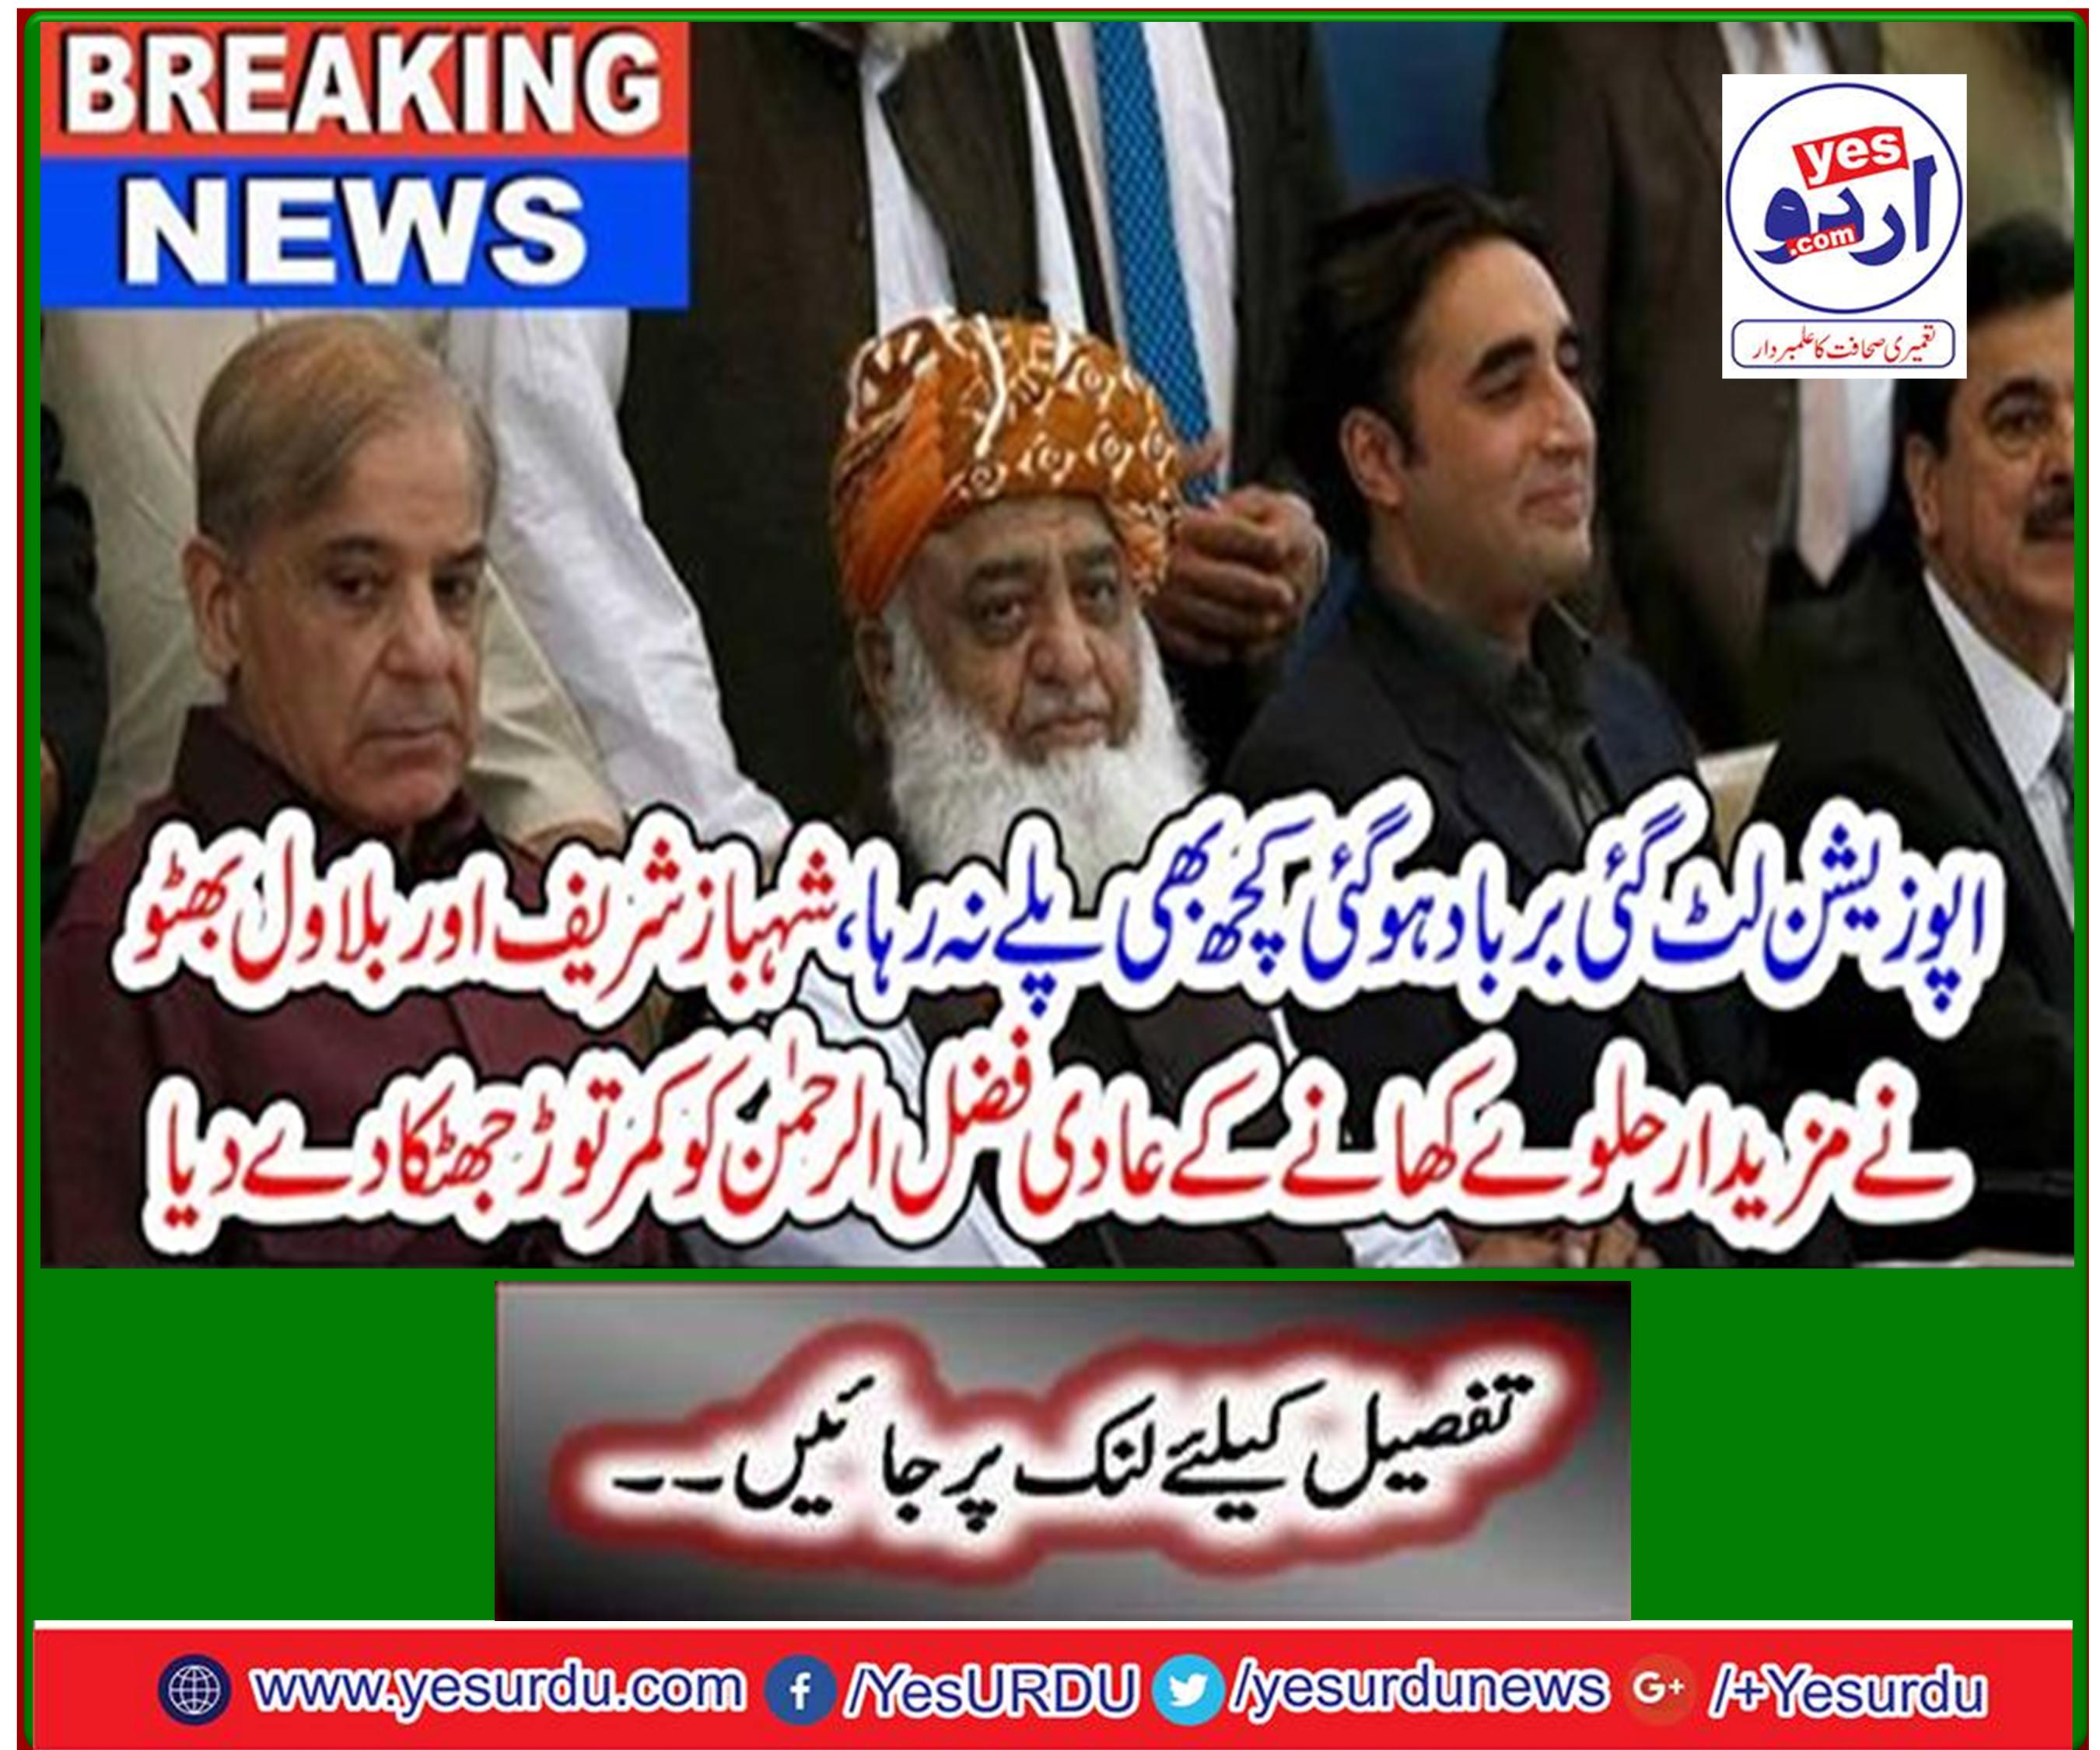 Breaking News: Opposition hung up and nothing was playing out: Shahbaz Sharif and Bilawal Bhutto shocked Fazlur Rehman, accustomed to eating delicious halo